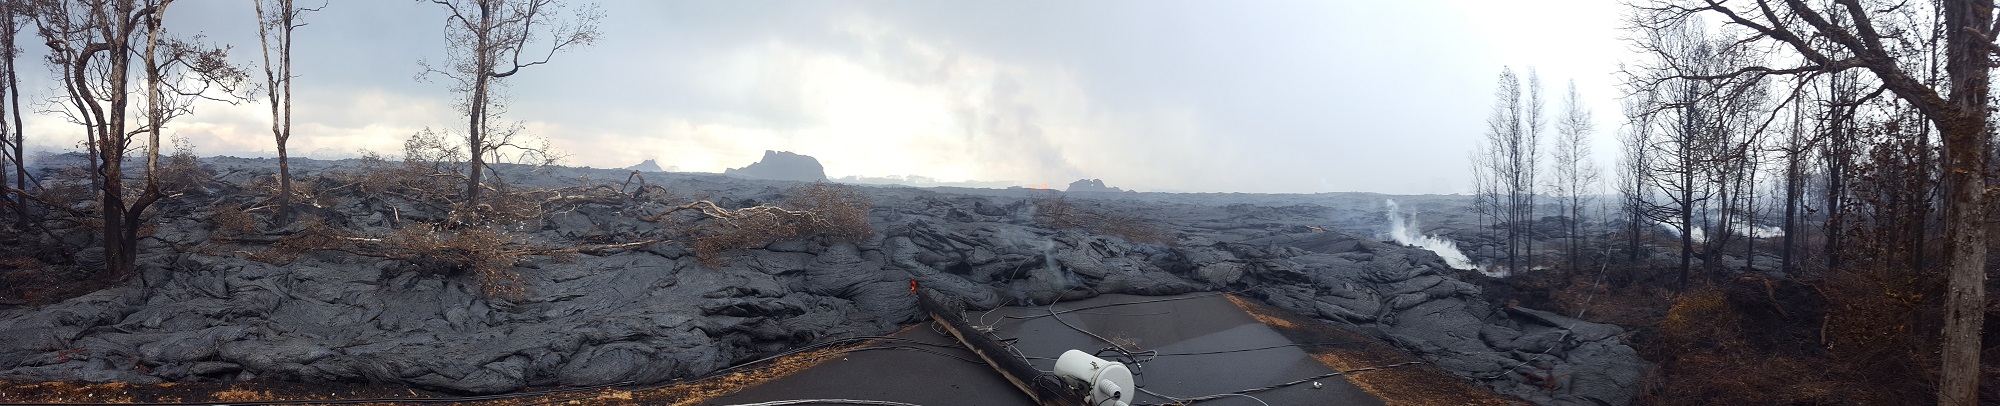 Image of lava flows taken by Dr. Ramsey.